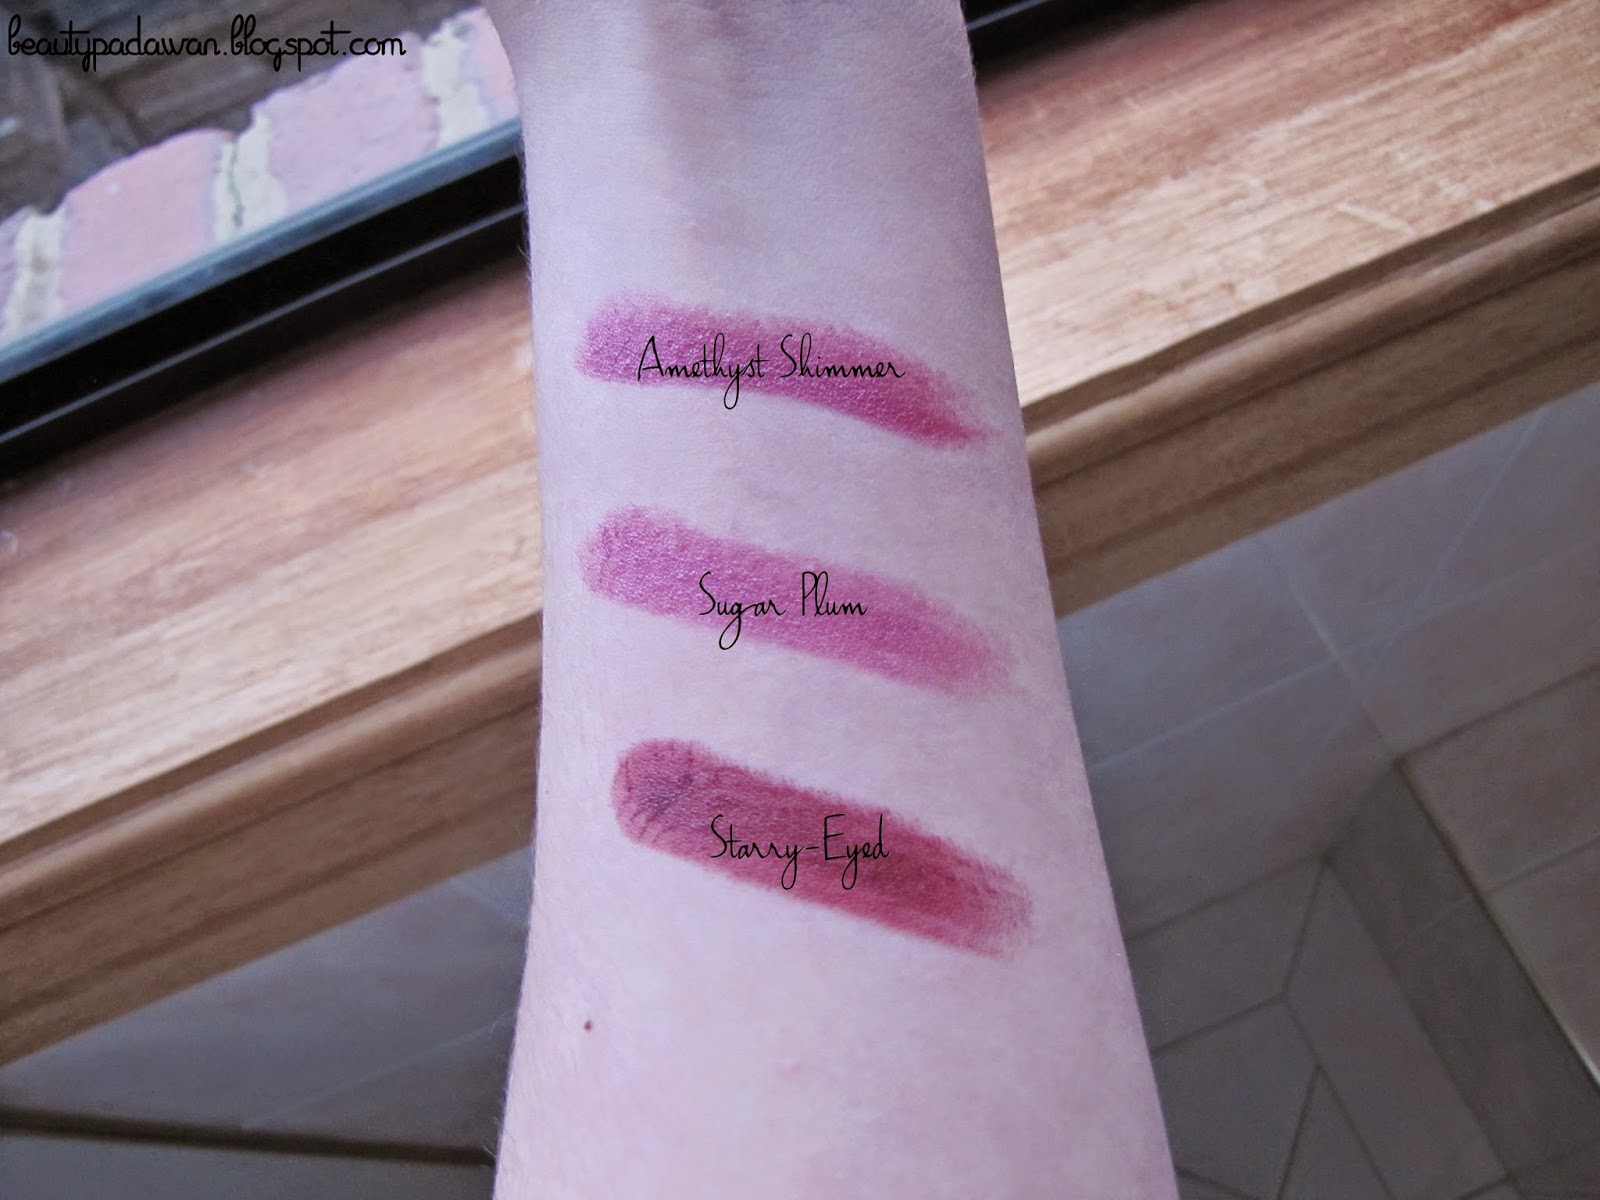 Swatches of Rimmel Lasting Finish Lipstick in Amethyst Shimmer, Sugar Plum and Starry-Eyed.